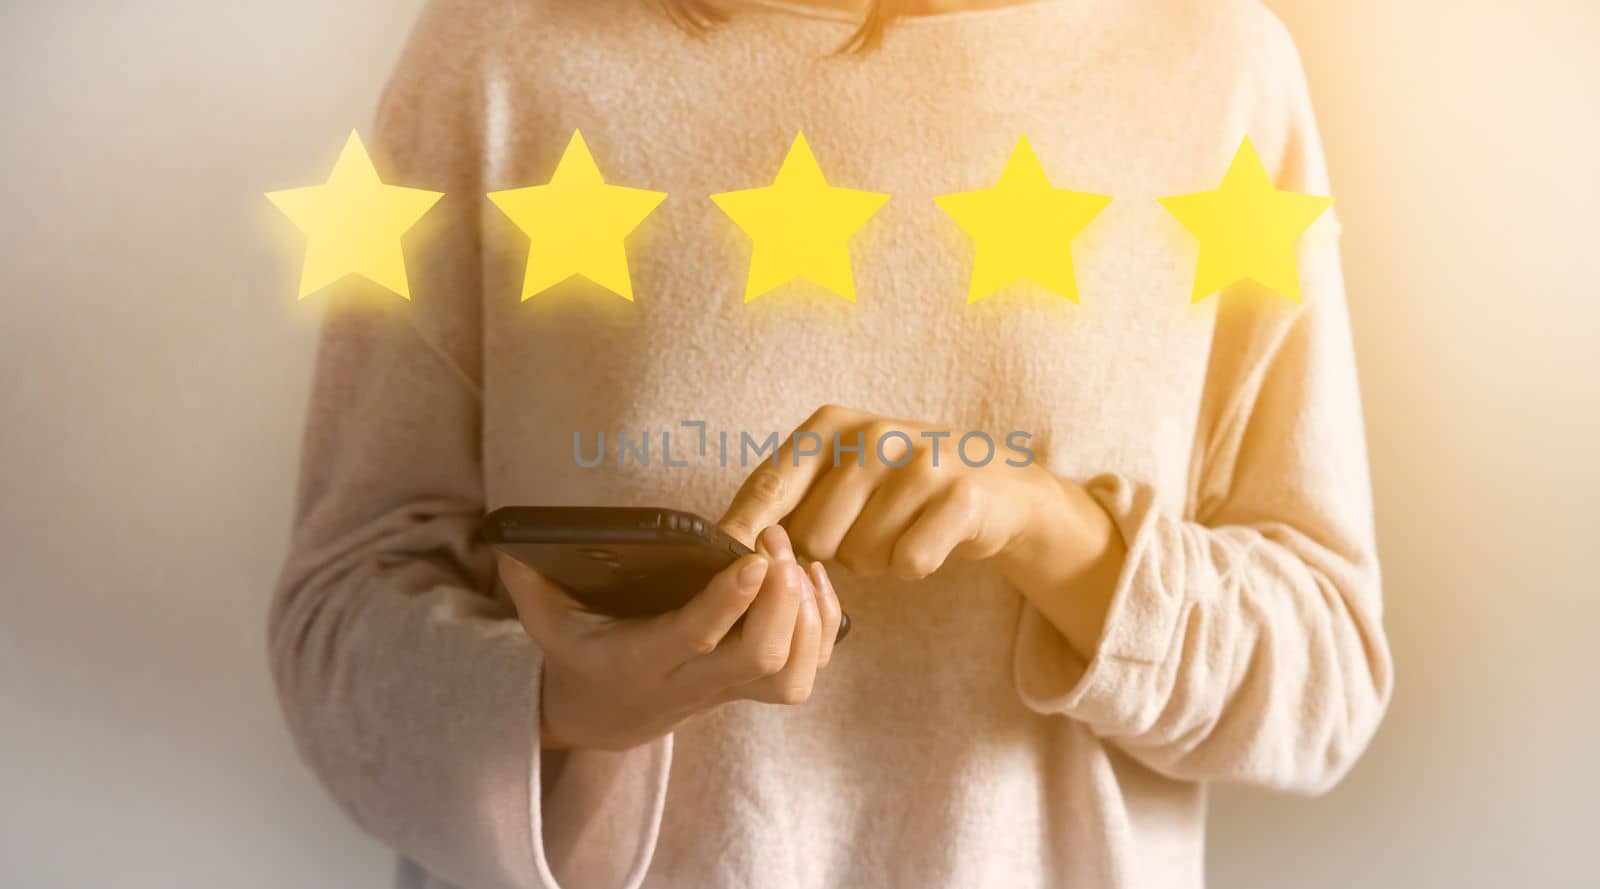 A young girl votes, puts a five-star rating in the reviews for the purchase, for the received, purchased services. Woman holding a phone in her hands close-up, sending a positive feedback.